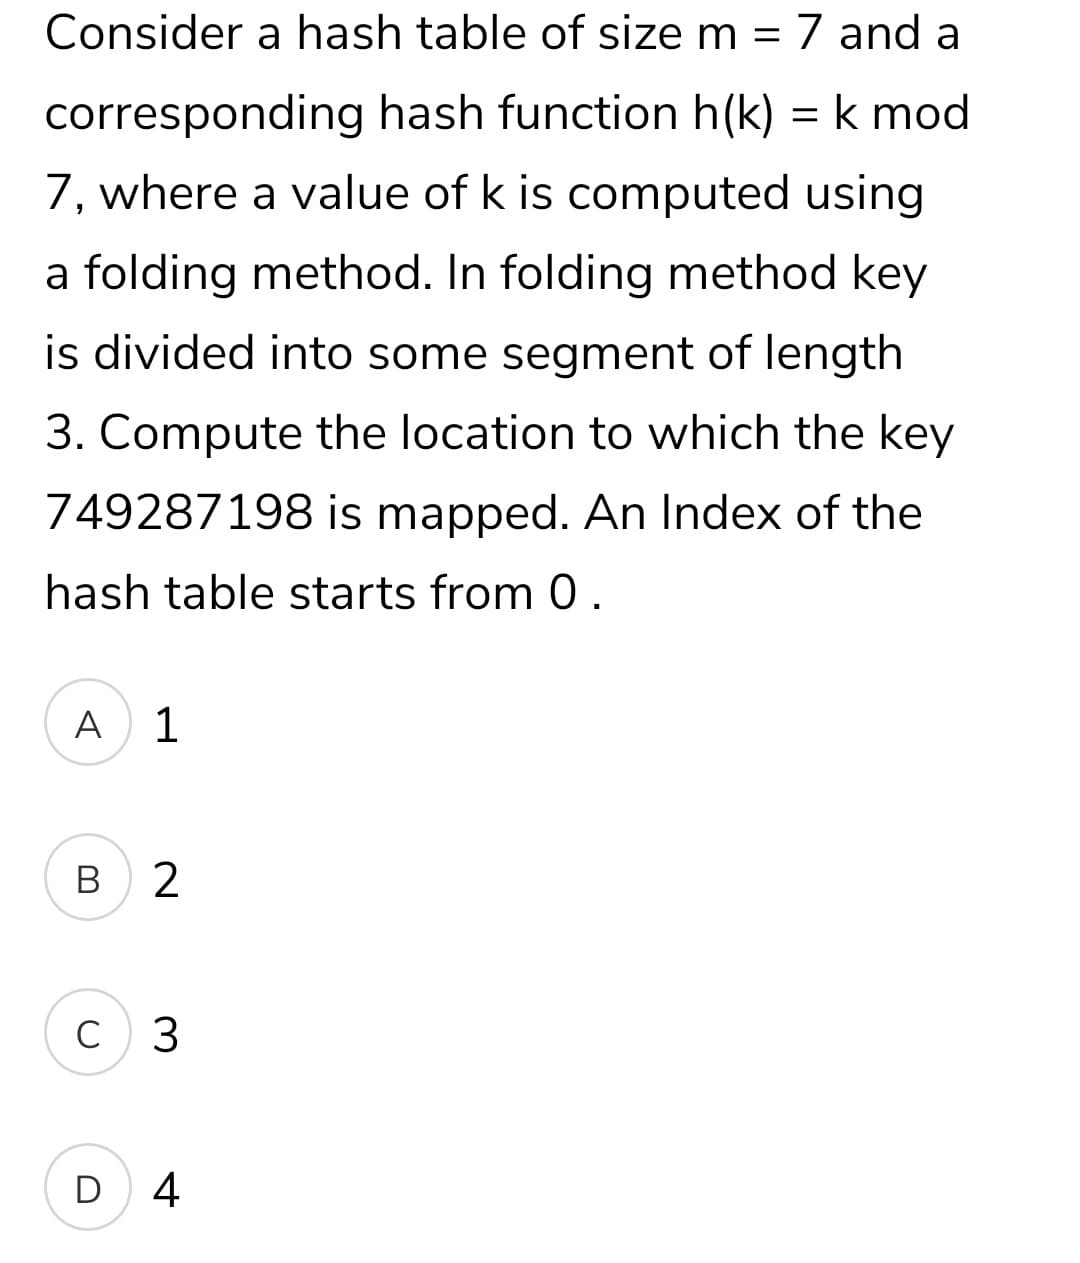 Consider a hash table of size m = 7 and a
corresponding hash function h(k) = k mod
7, where a value of k is computed using
a folding method. In folding method key
is divided into some segment of length
3. Compute the location to which the key
749287198 is mapped. An Index of the
hash table starts from 0.
A
1
В
C 3
D 4
